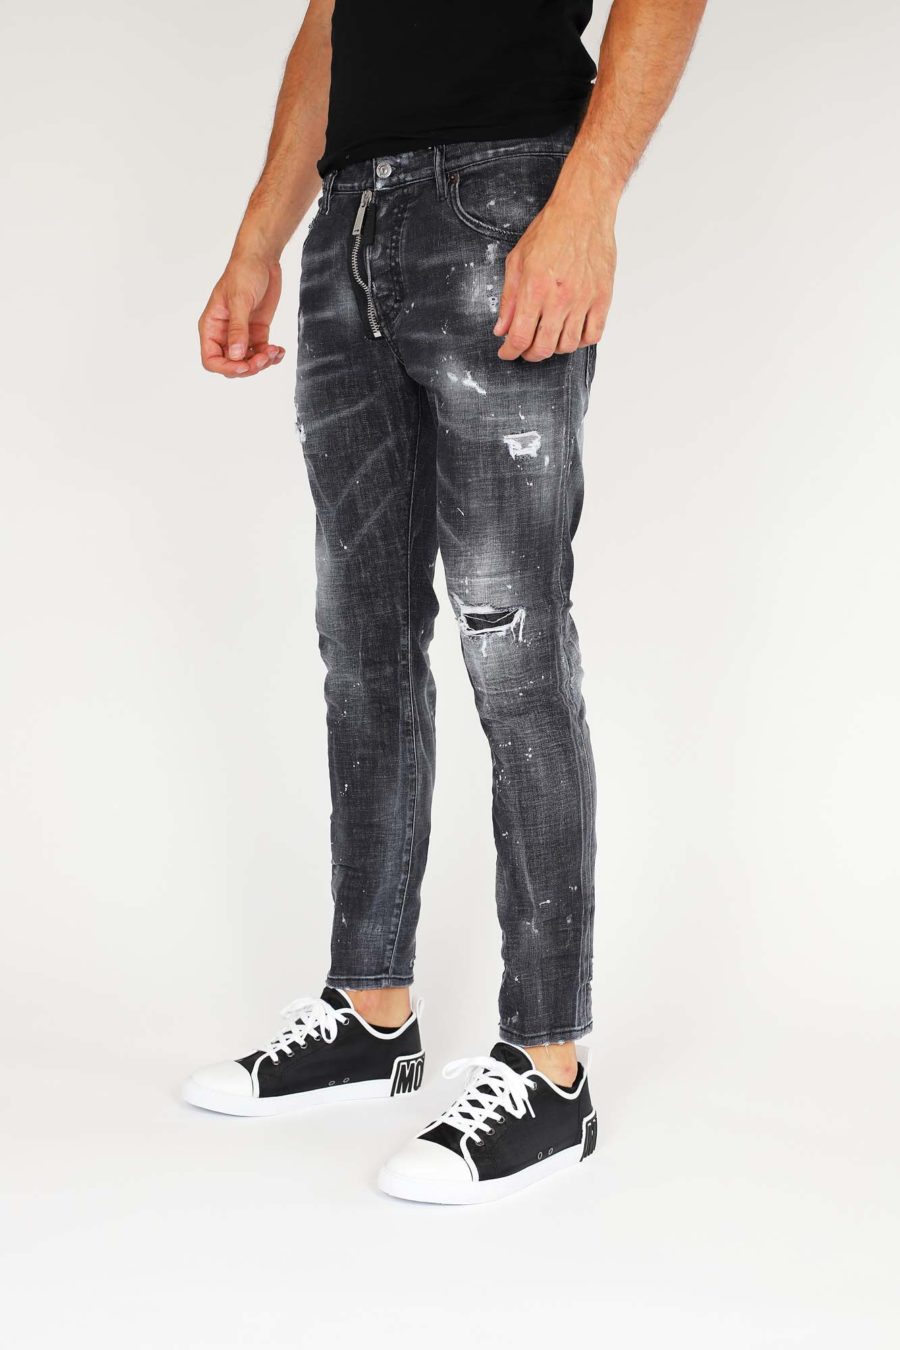 Black "Skater" jeans with zip - IMG 9827